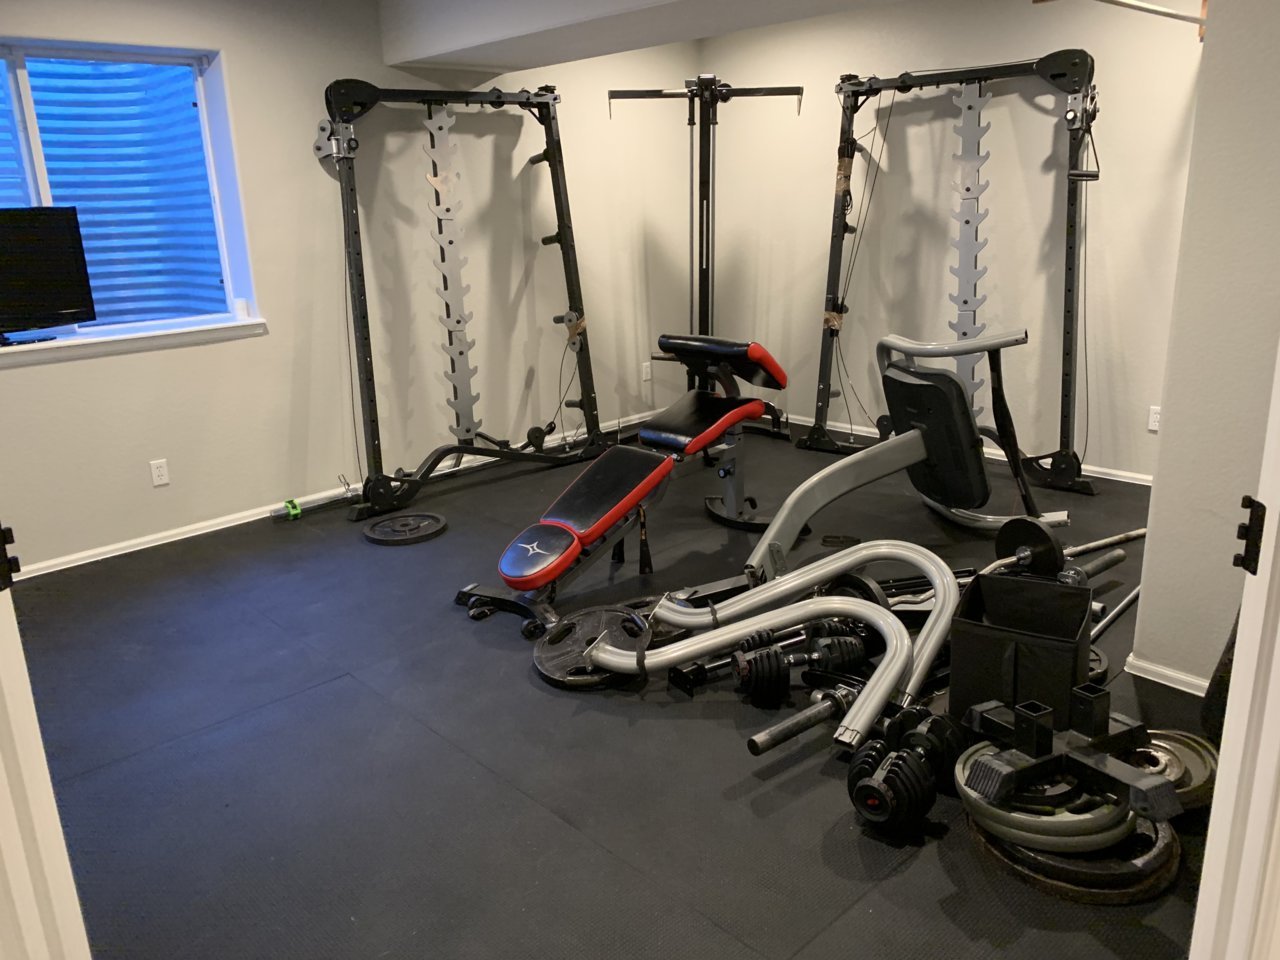 Show Off your Home Gym | Page 2 | Toyota Tundra Forum